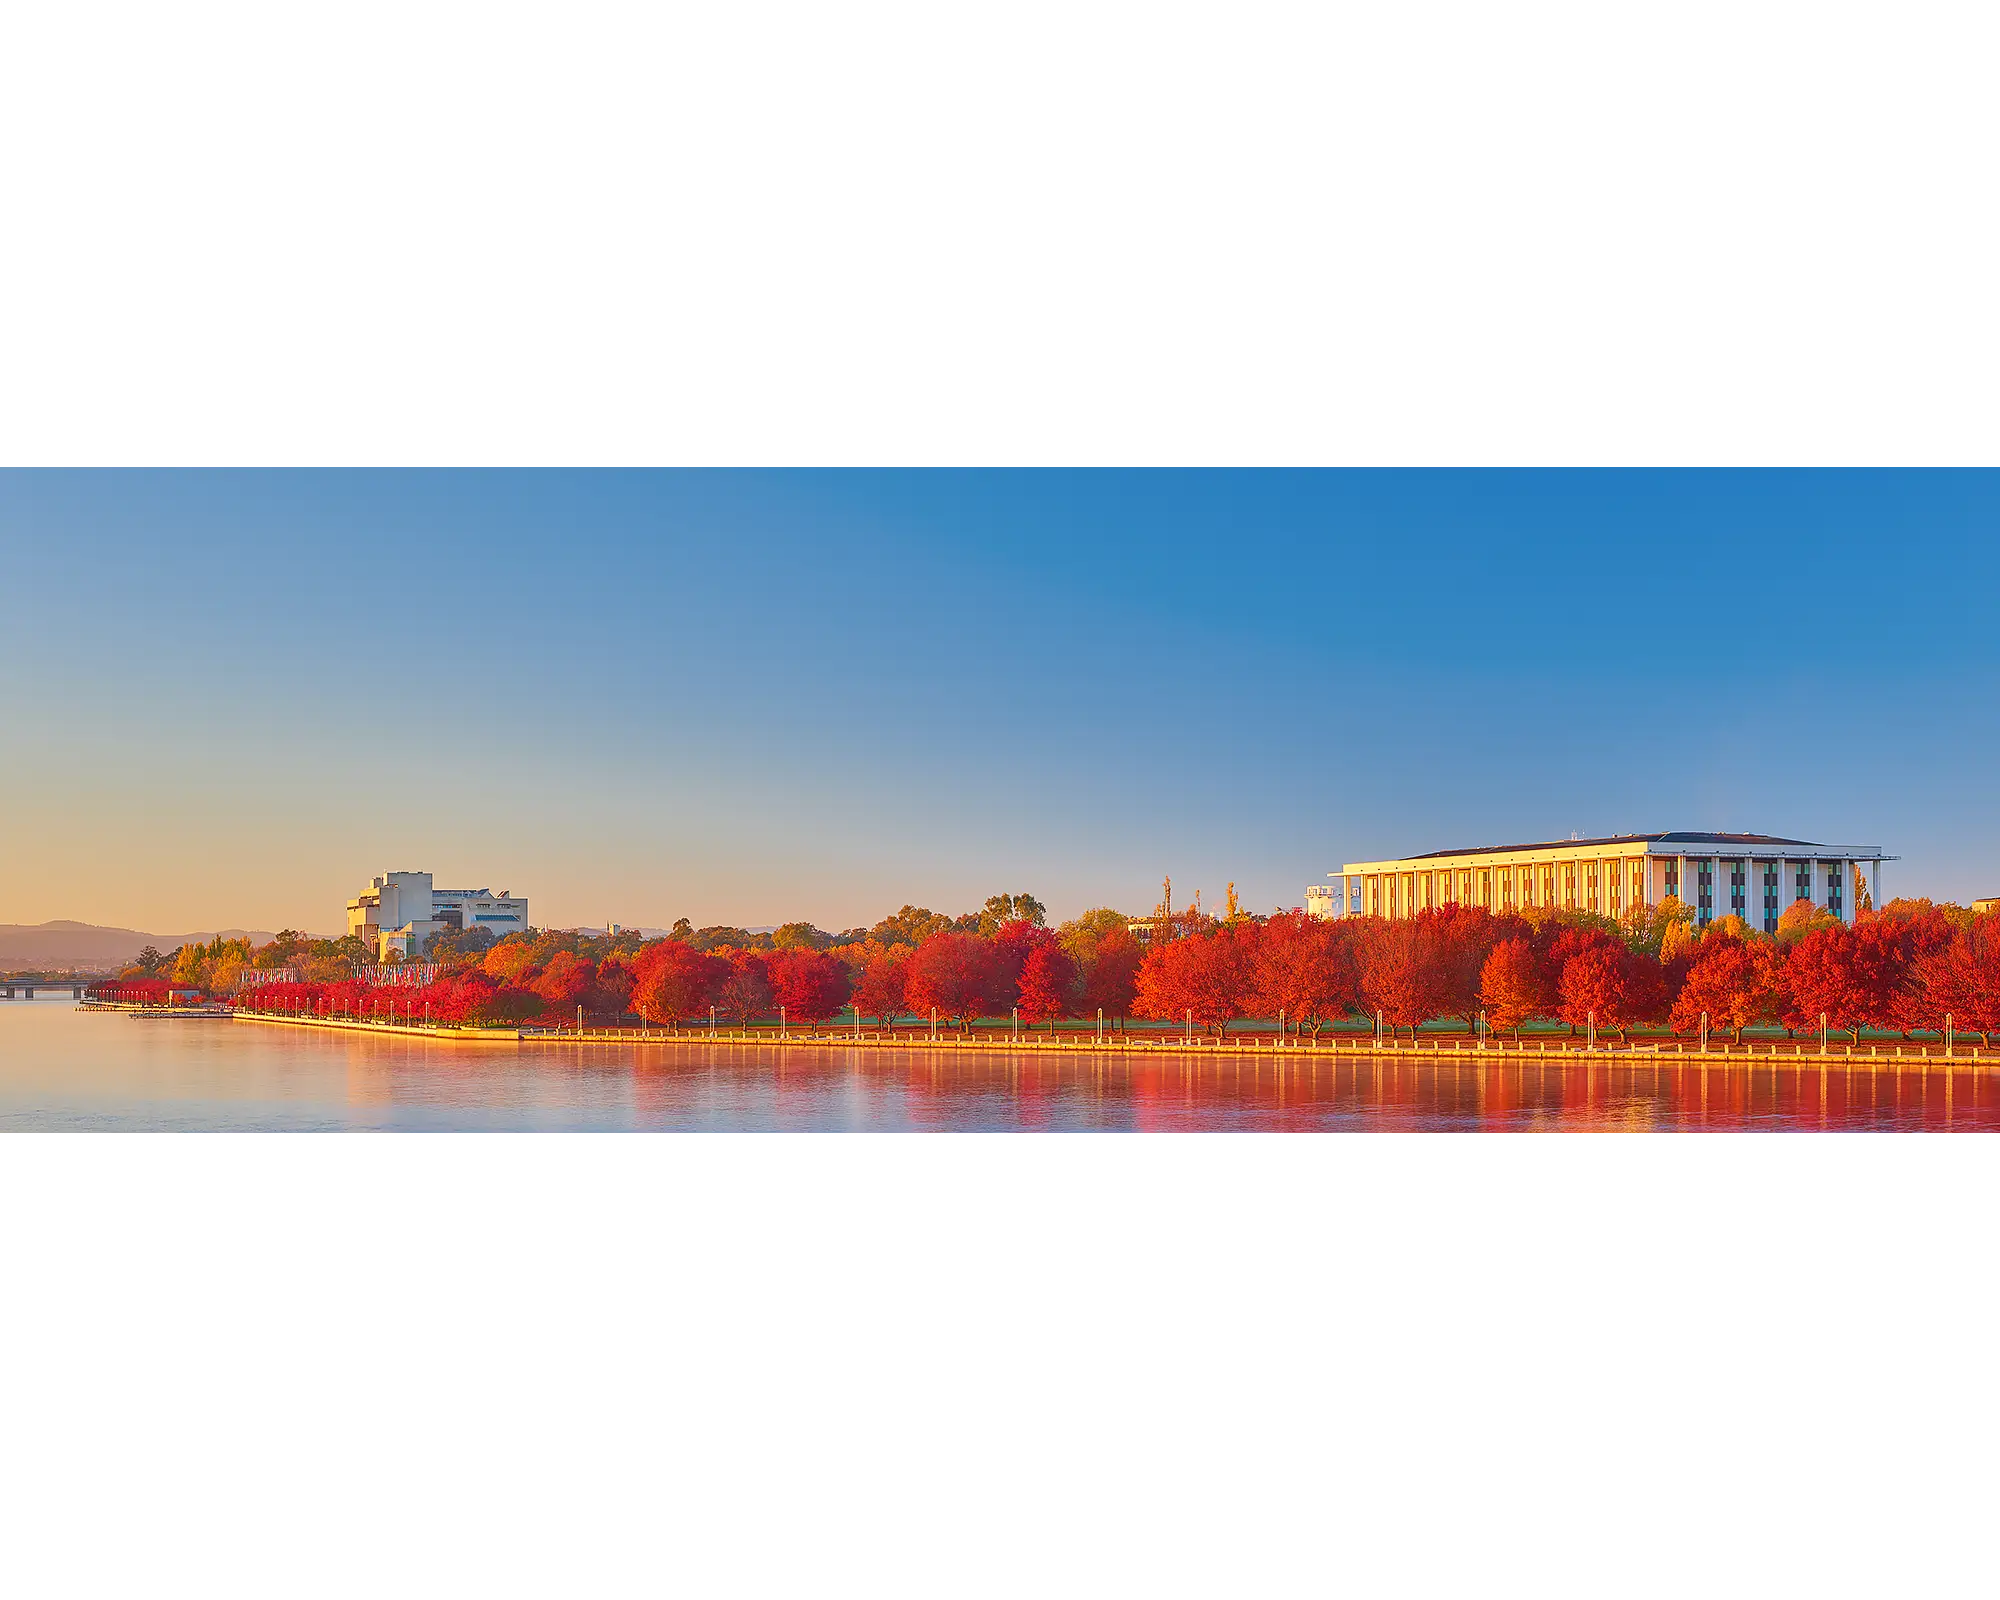 Simply Red. Autumn sunrise with red trees beside National Library and High Court, Lake Burley Griffin, Canberra.